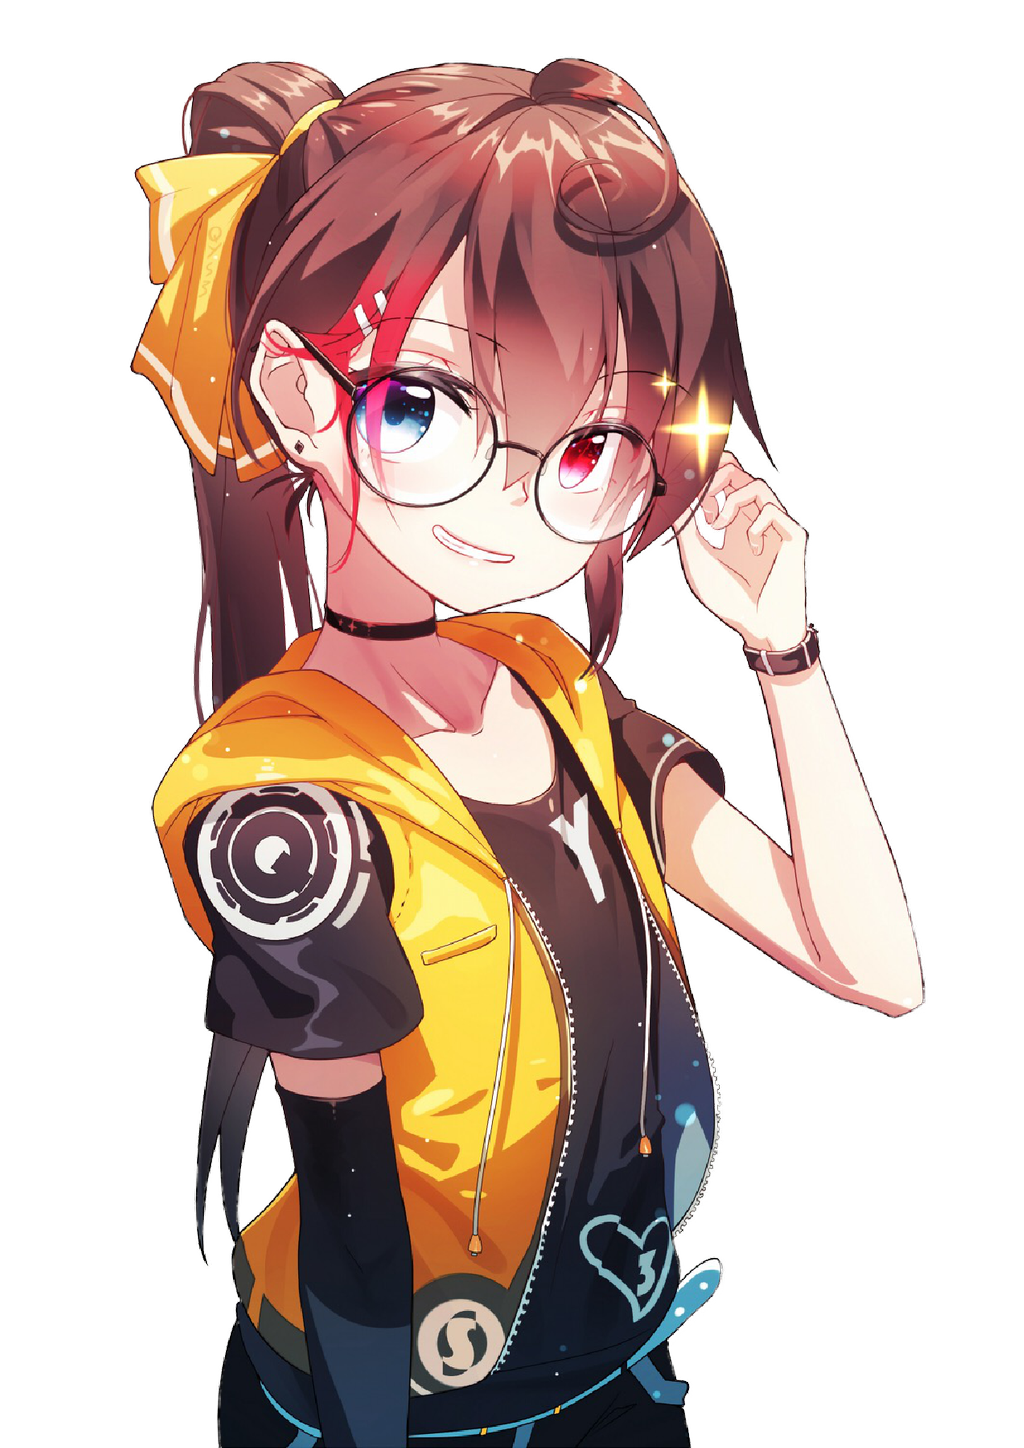 Cute Anime Girl Png Image Hd Png All